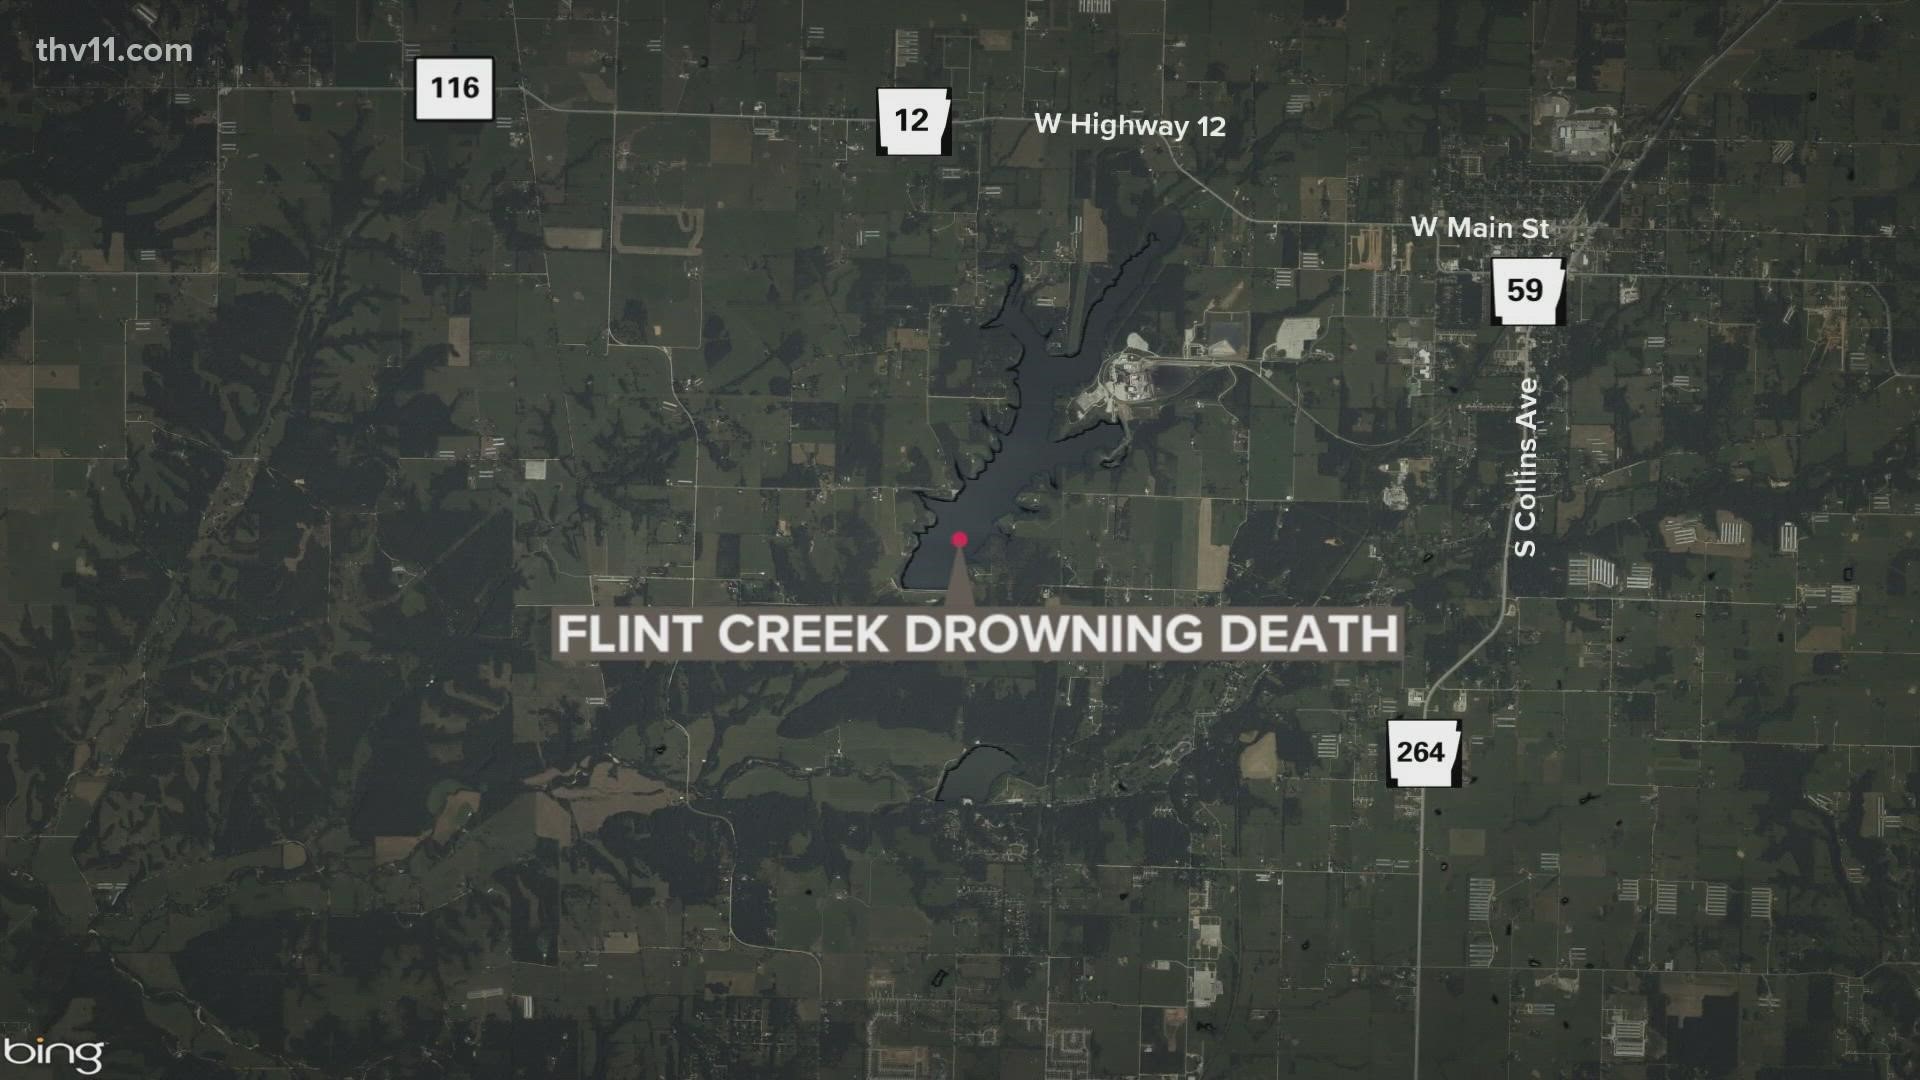 The incident happened over the Memorial Day weekend at Flint Creek, near Siloam Springs, Arkansas.